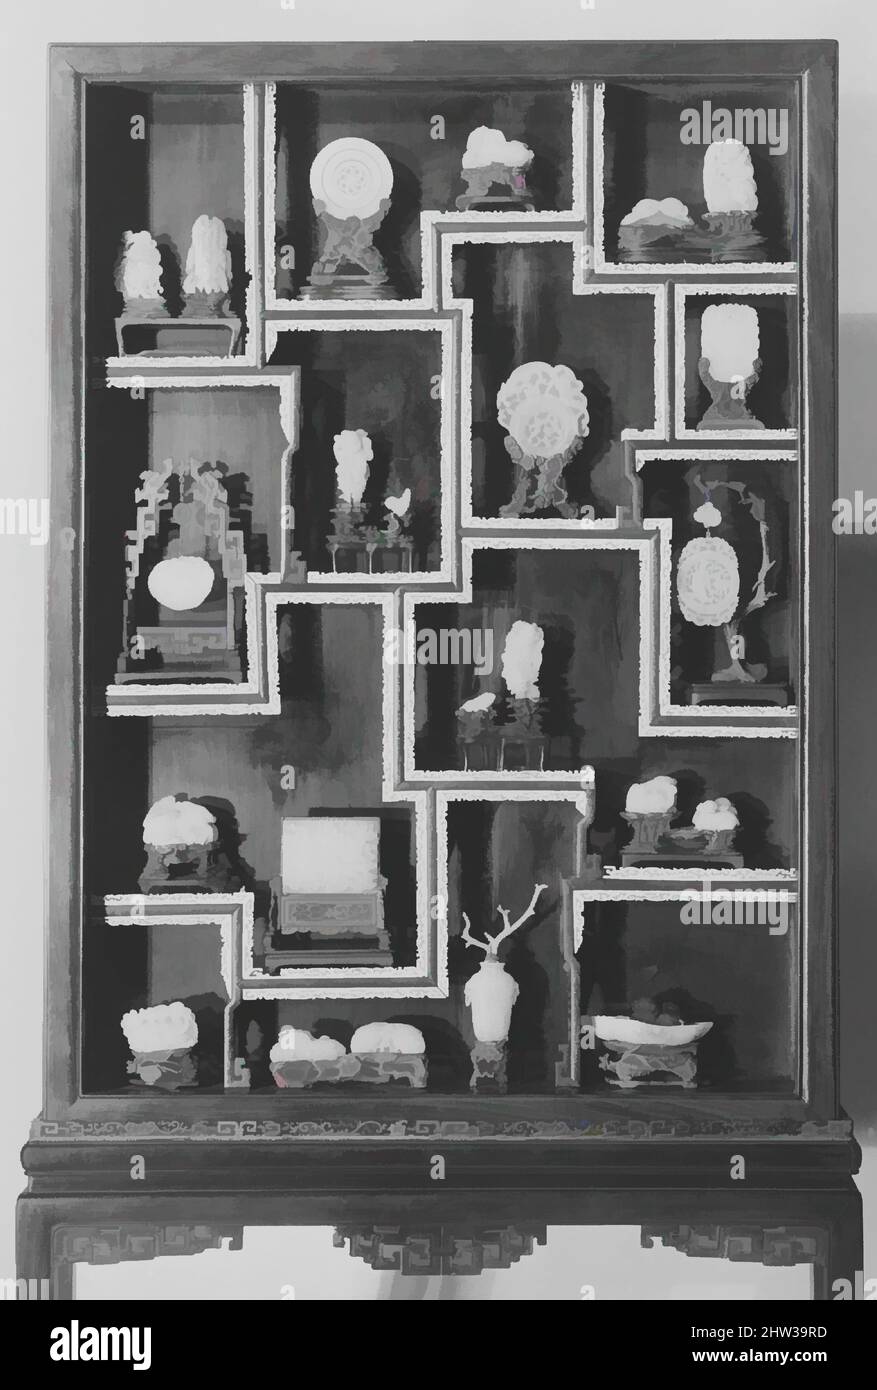 Art inspired by Vitrine Containing Twenty-Three Ornaments, 18th–19th century, China, a-w:Jade and other materials; x: wood vitrine with strips of ivory fret, a. H. 1 7/8 in. (4.8 cm); W. 1 1/2 in. (3.8 cm), Jade, Classic works modernized by Artotop with a splash of modernity. Shapes, color and value, eye-catching visual impact on art. Emotions through freedom of artworks in a contemporary way. A timeless message pursuing a wildly creative new direction. Artists turning to the digital medium and creating the Artotop NFT Stock Photo